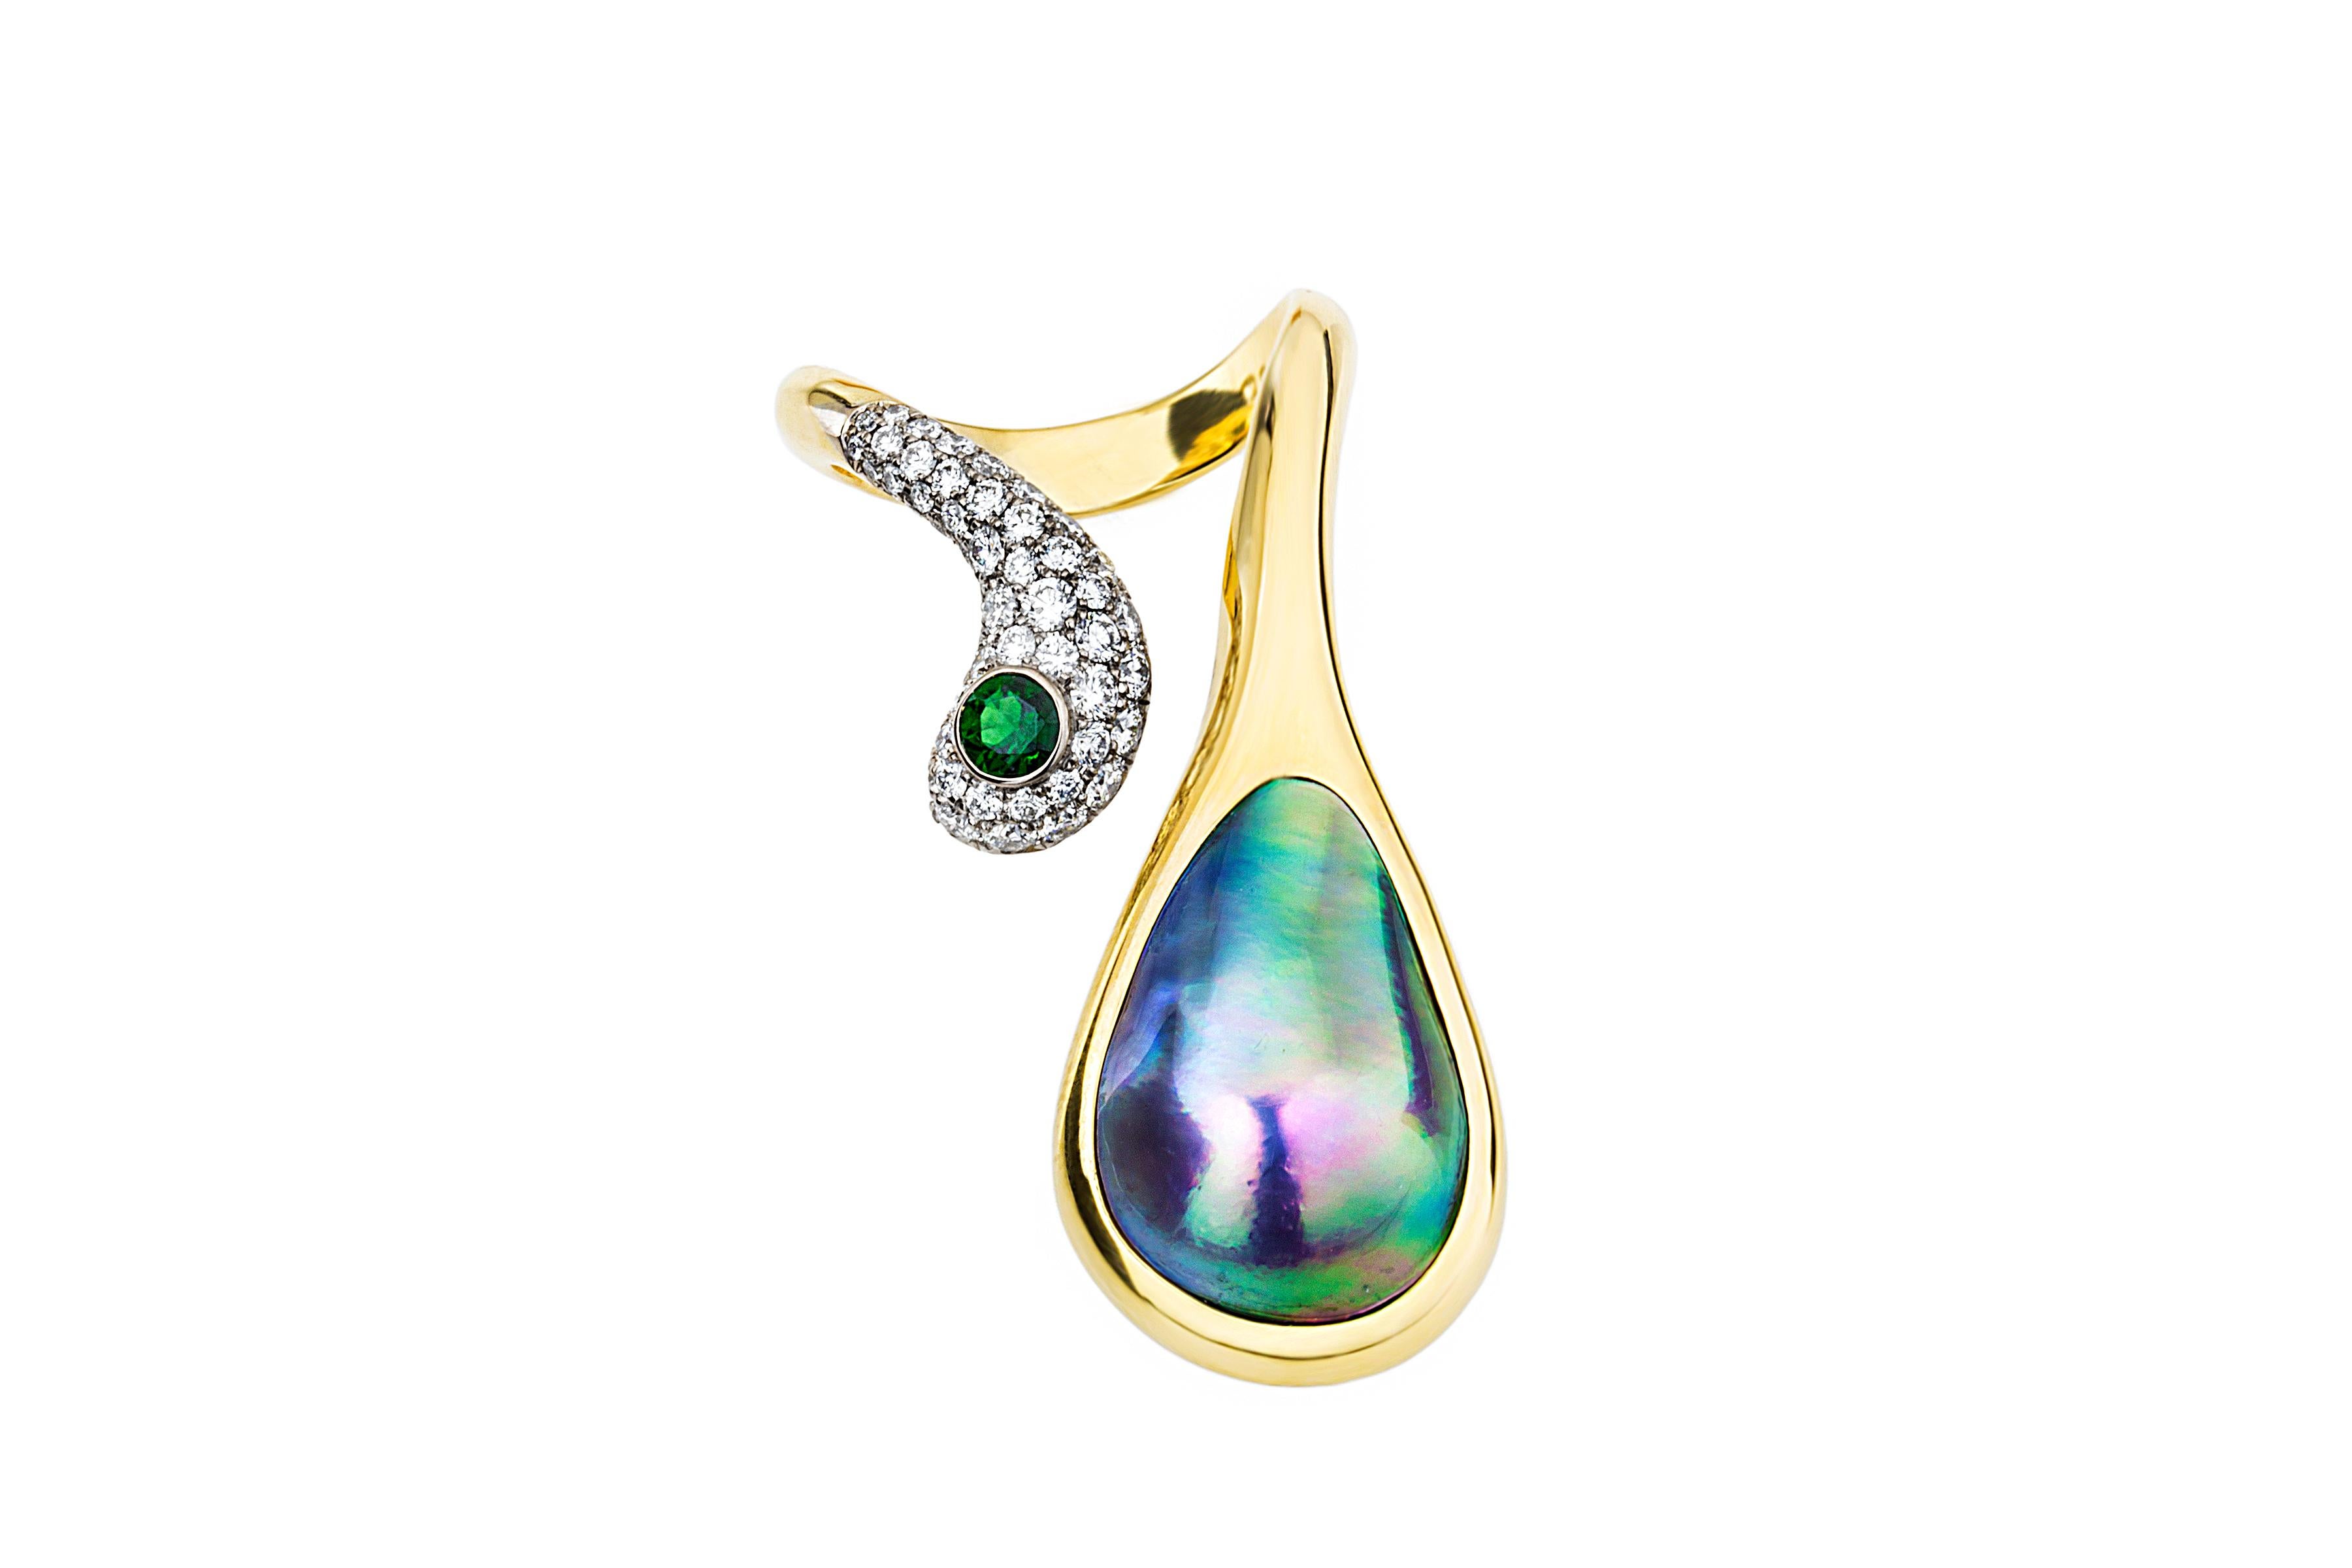 ONE of a KIND

The ‘Blues After Dark’ is a one-of-a-kind work of art that wraps the finger in avant-garde elegance. A Sea of Cortez teardrop pearl set in yellow gold culminates in a flirty sea of diamonds floating a lone tsavorite. No two Sea of